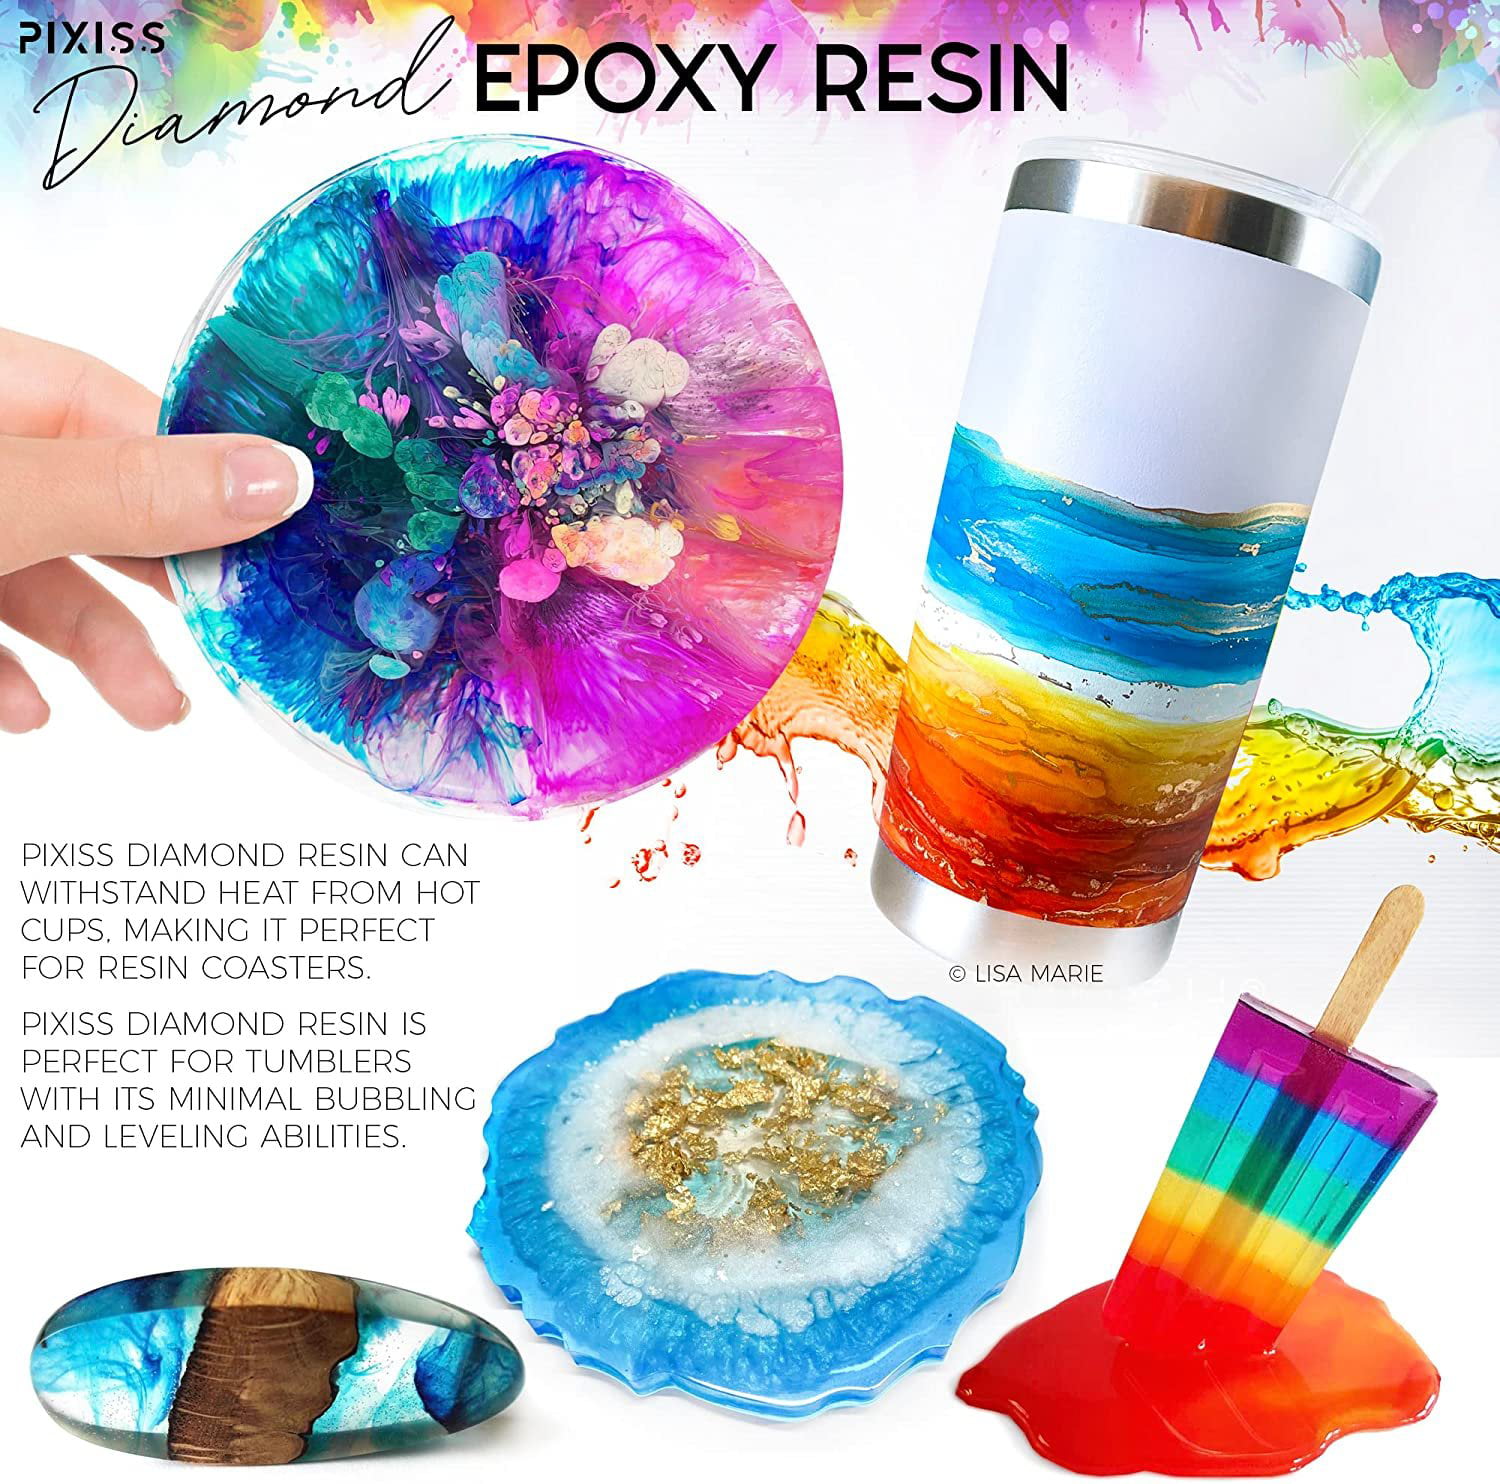 Epoxy Resin Crystal Clear Casting Resin for Epoxy and Resin Art Pixiss  Brand Easy Mix 2 Gallon Kit Supplies for Tumblers, Jewelry Resin, Molds,  Crafting Resin Kit 